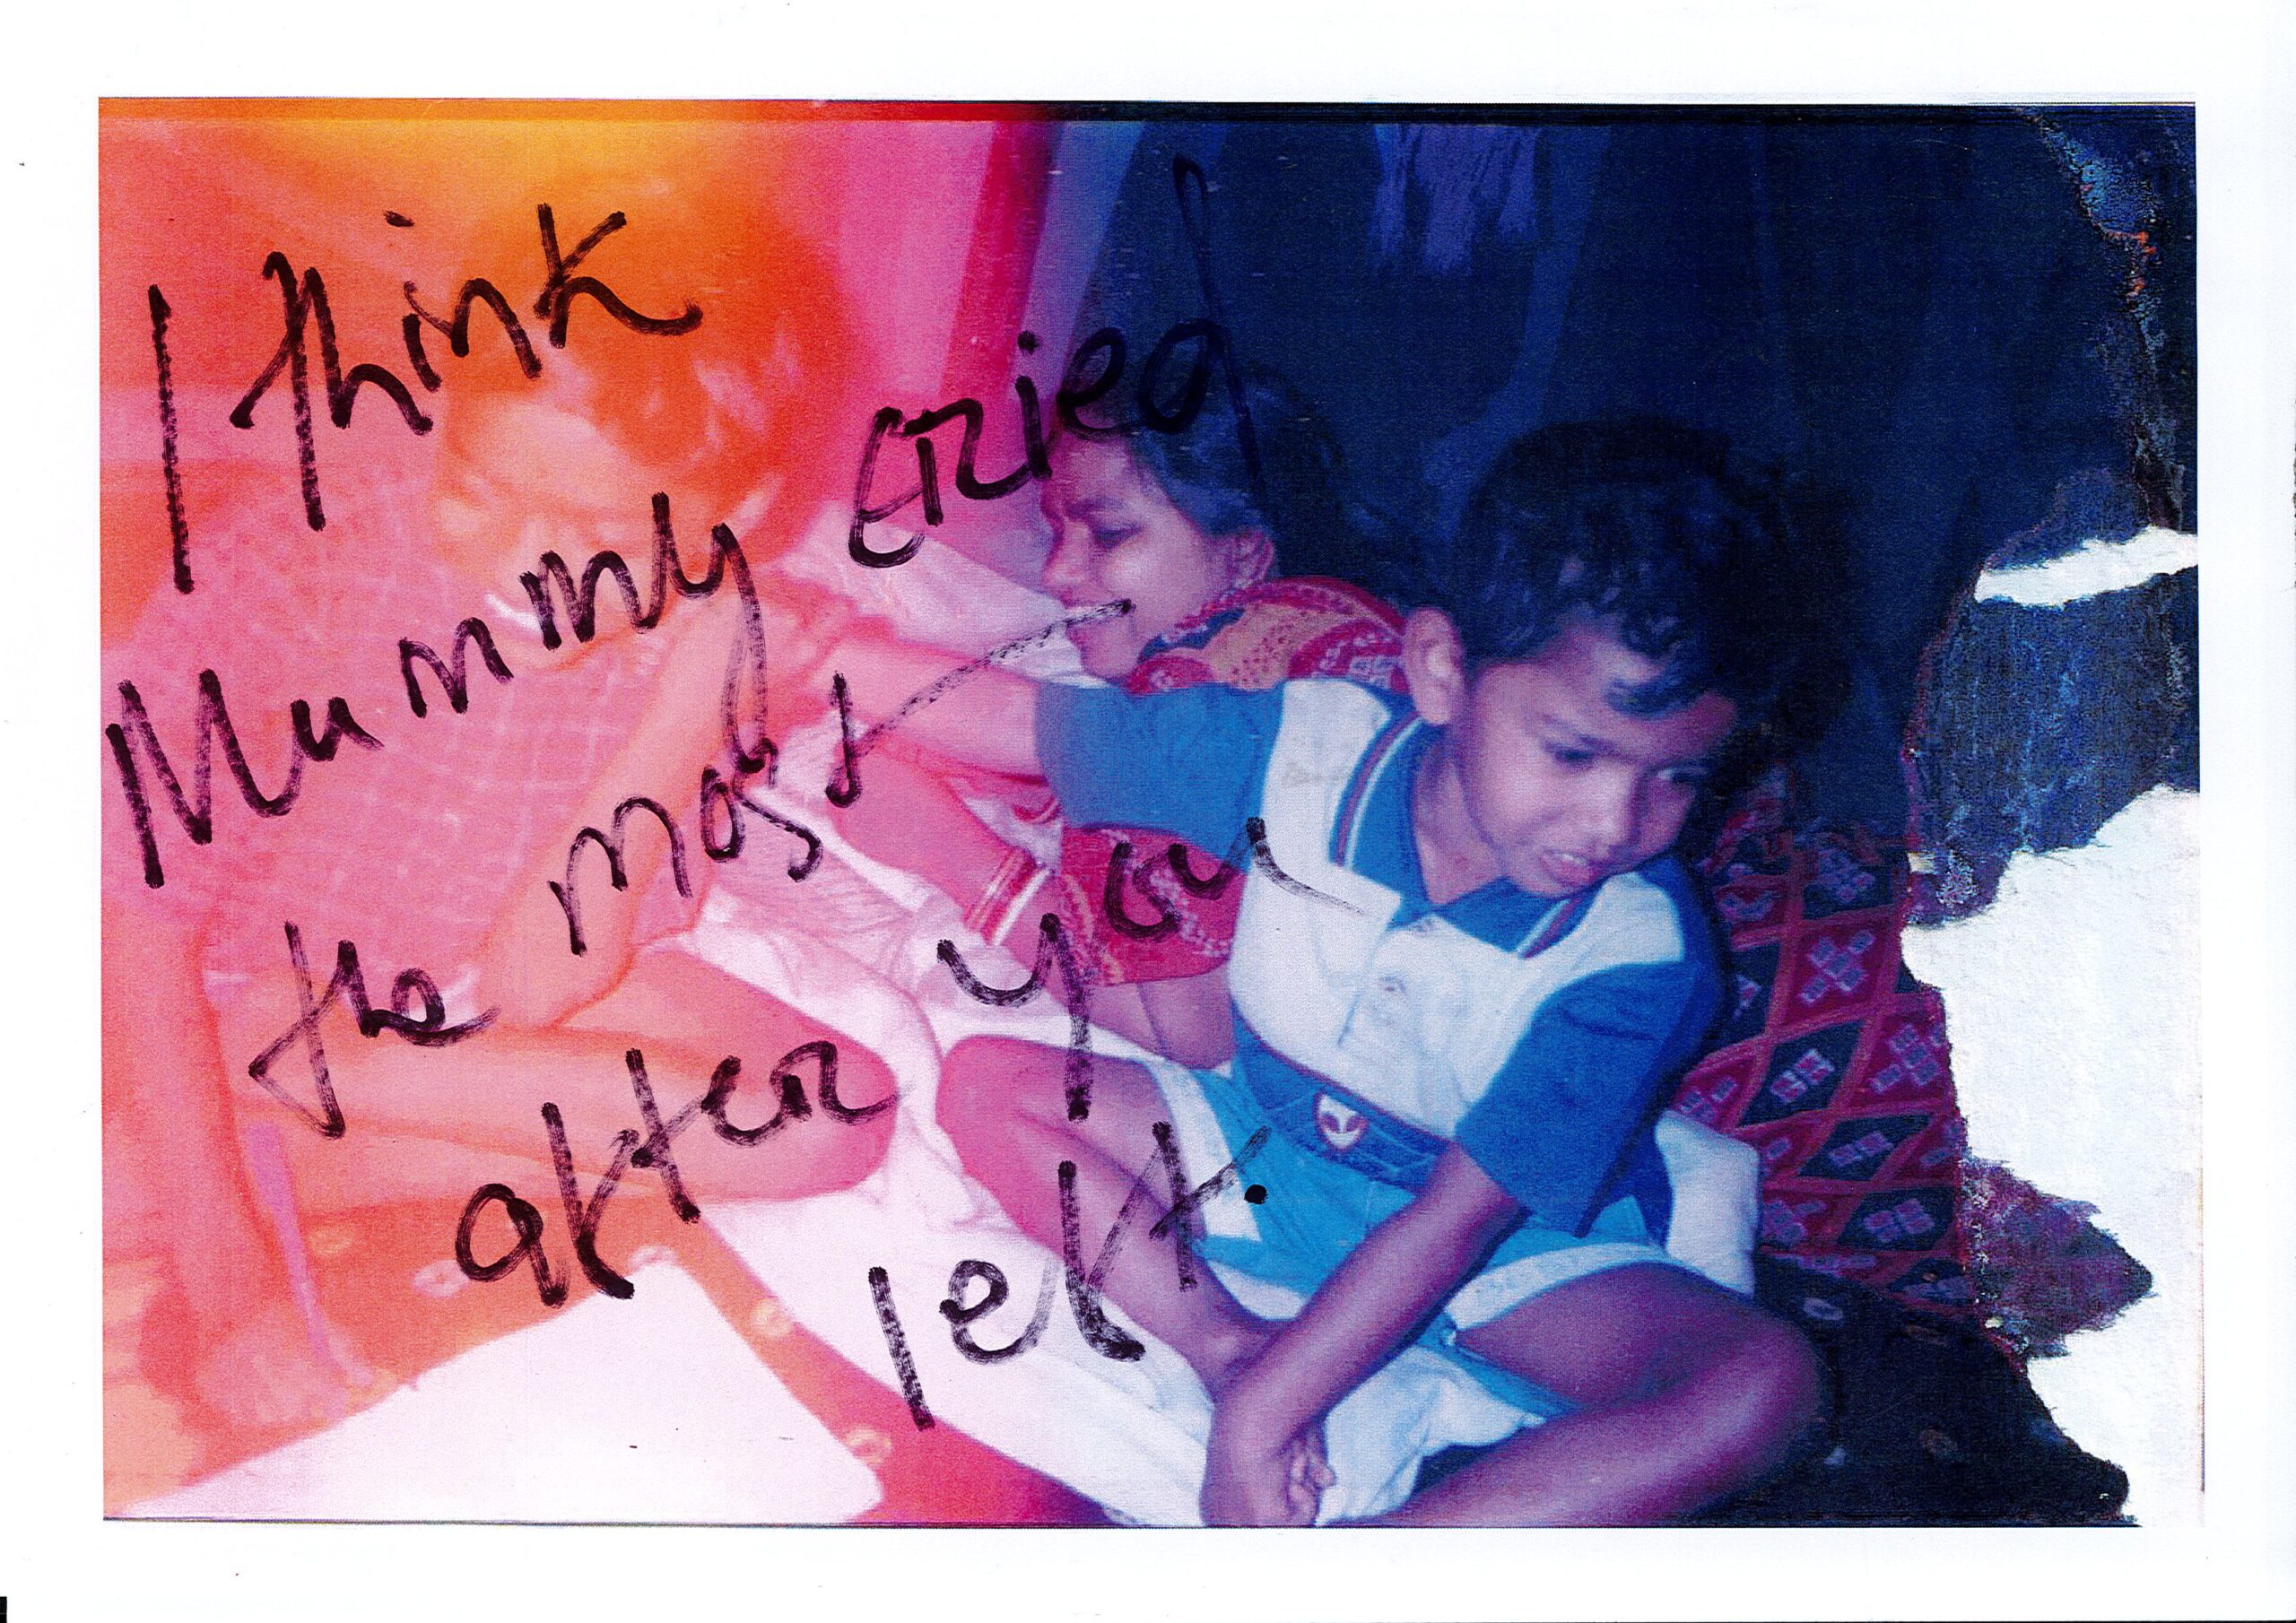 An old family photo with handwritten text on it. A kid with his brother and mother are on the bed.